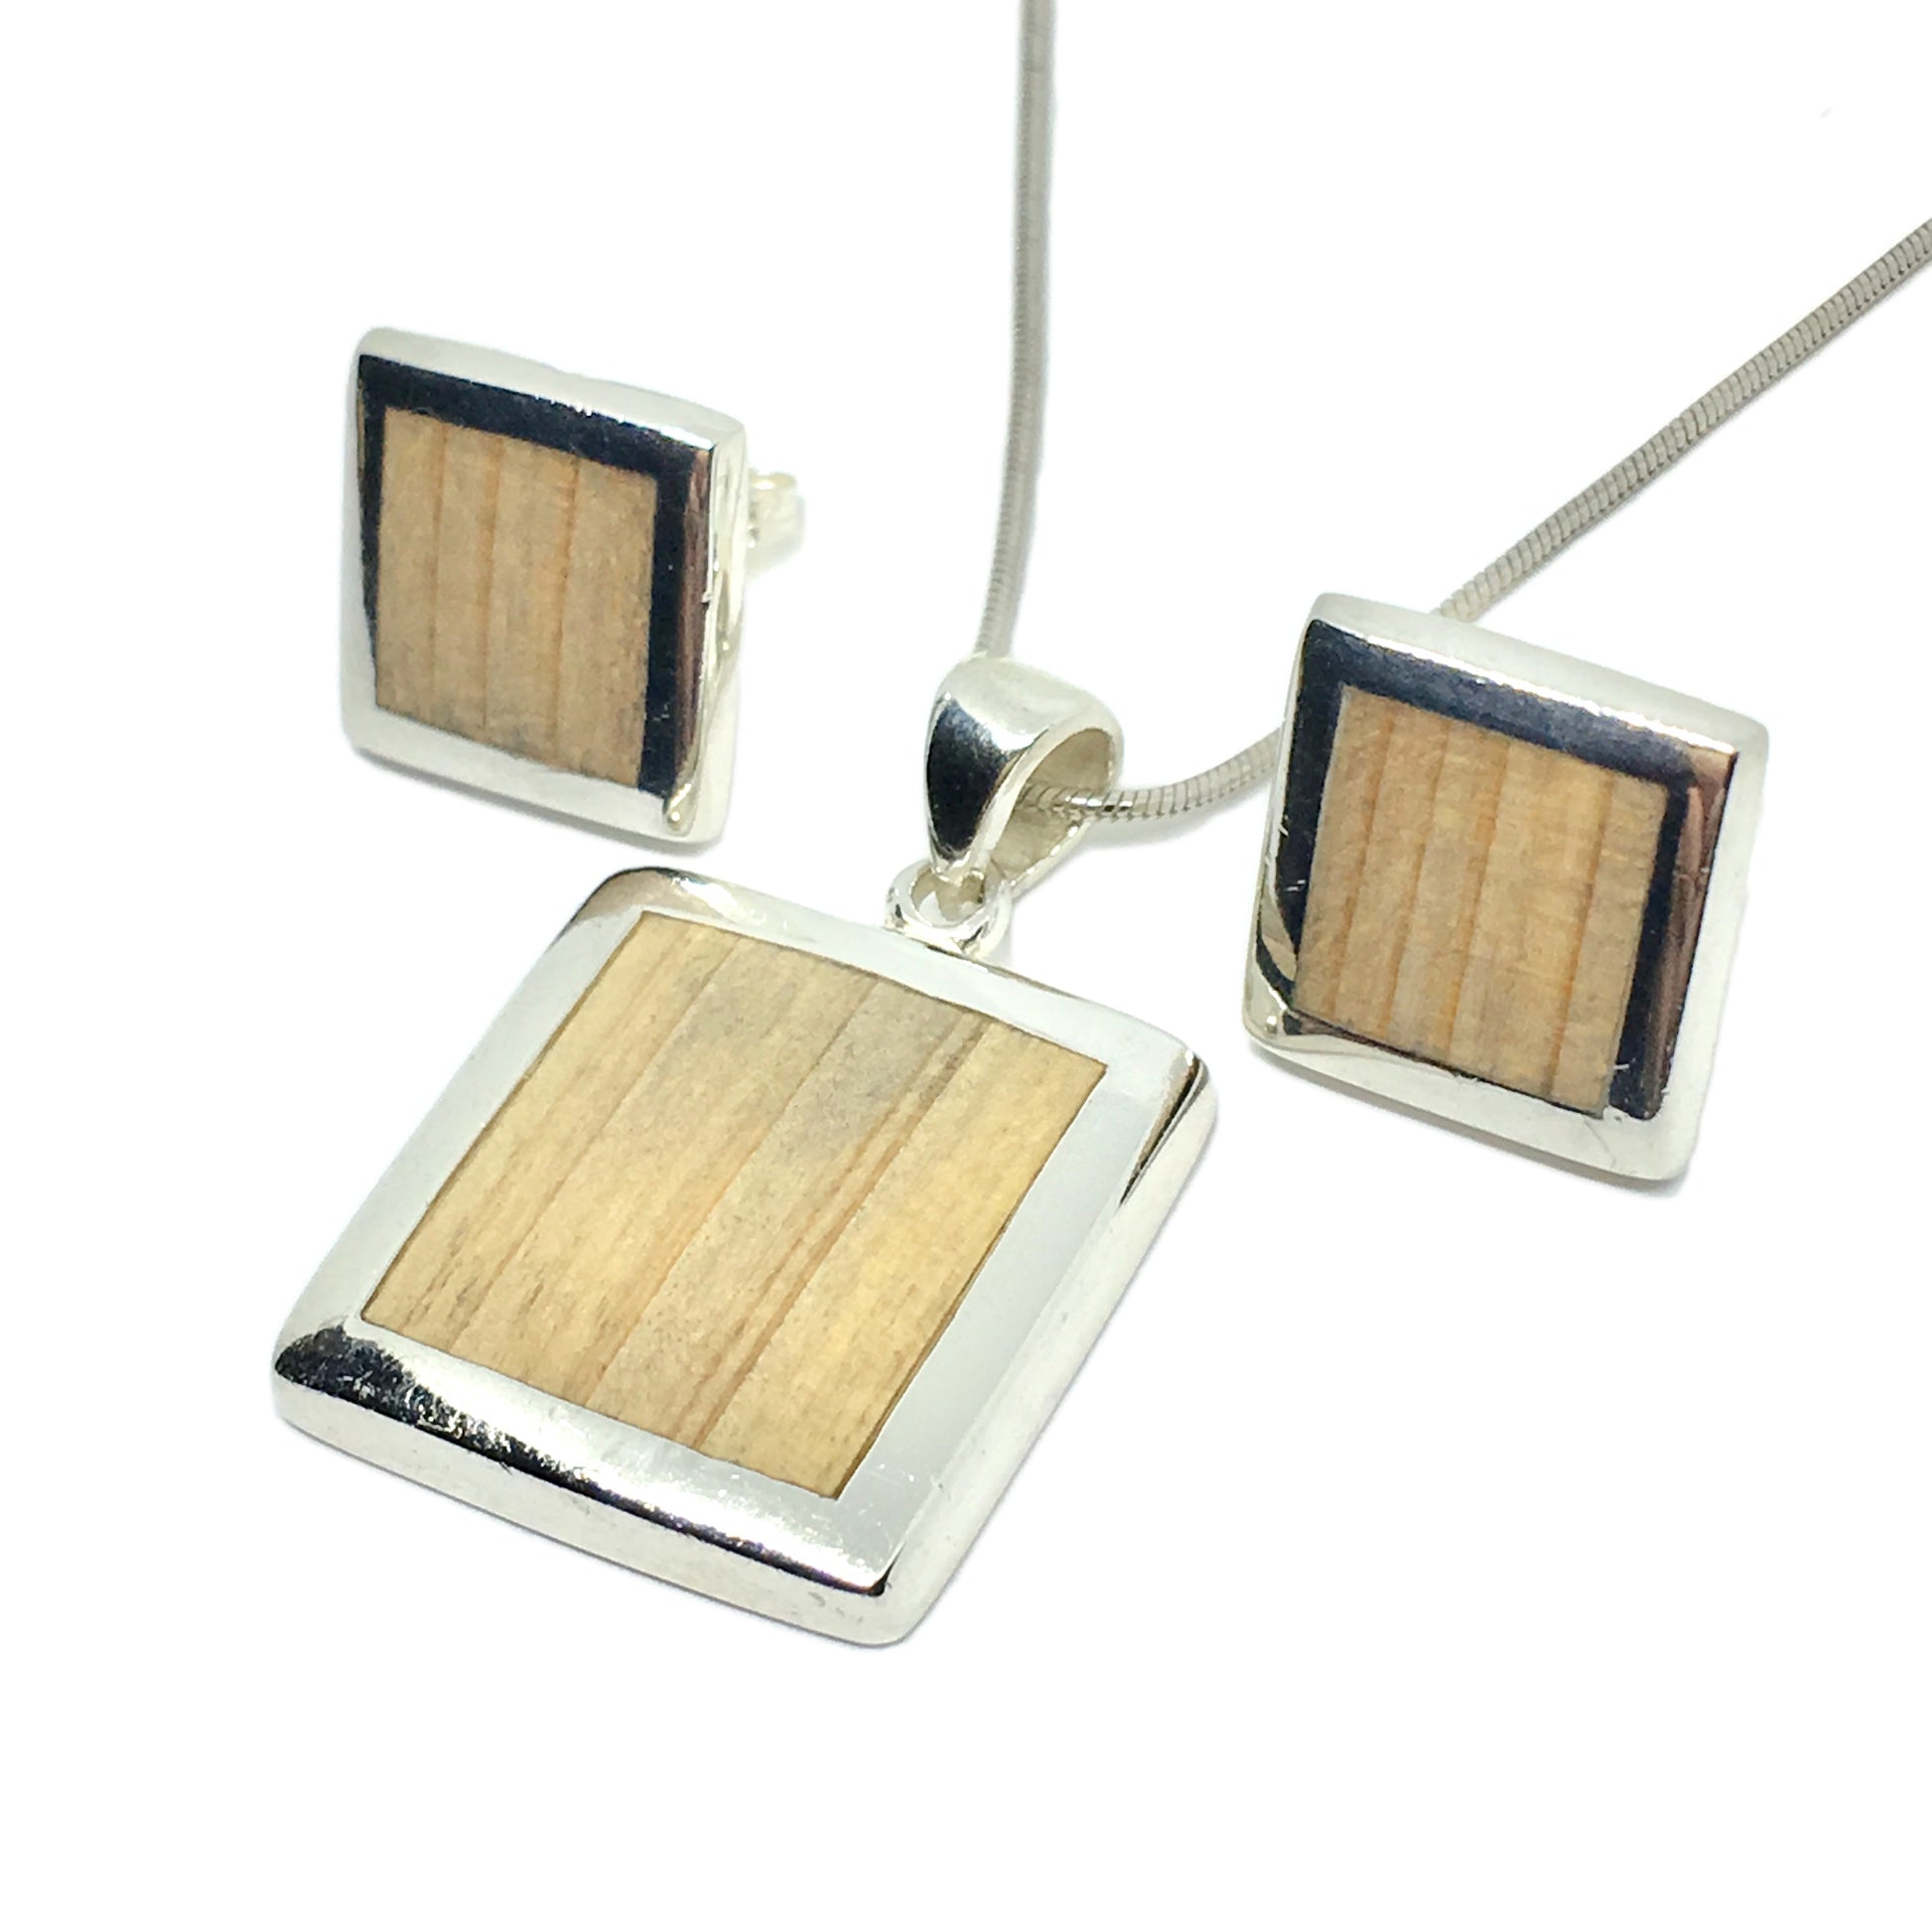 Matching Jewelry Set - Sterling Silver Natural Wood inlay Geometric Square Design Pendant Necklace & Earrings set - Blingschlingers.com - USA